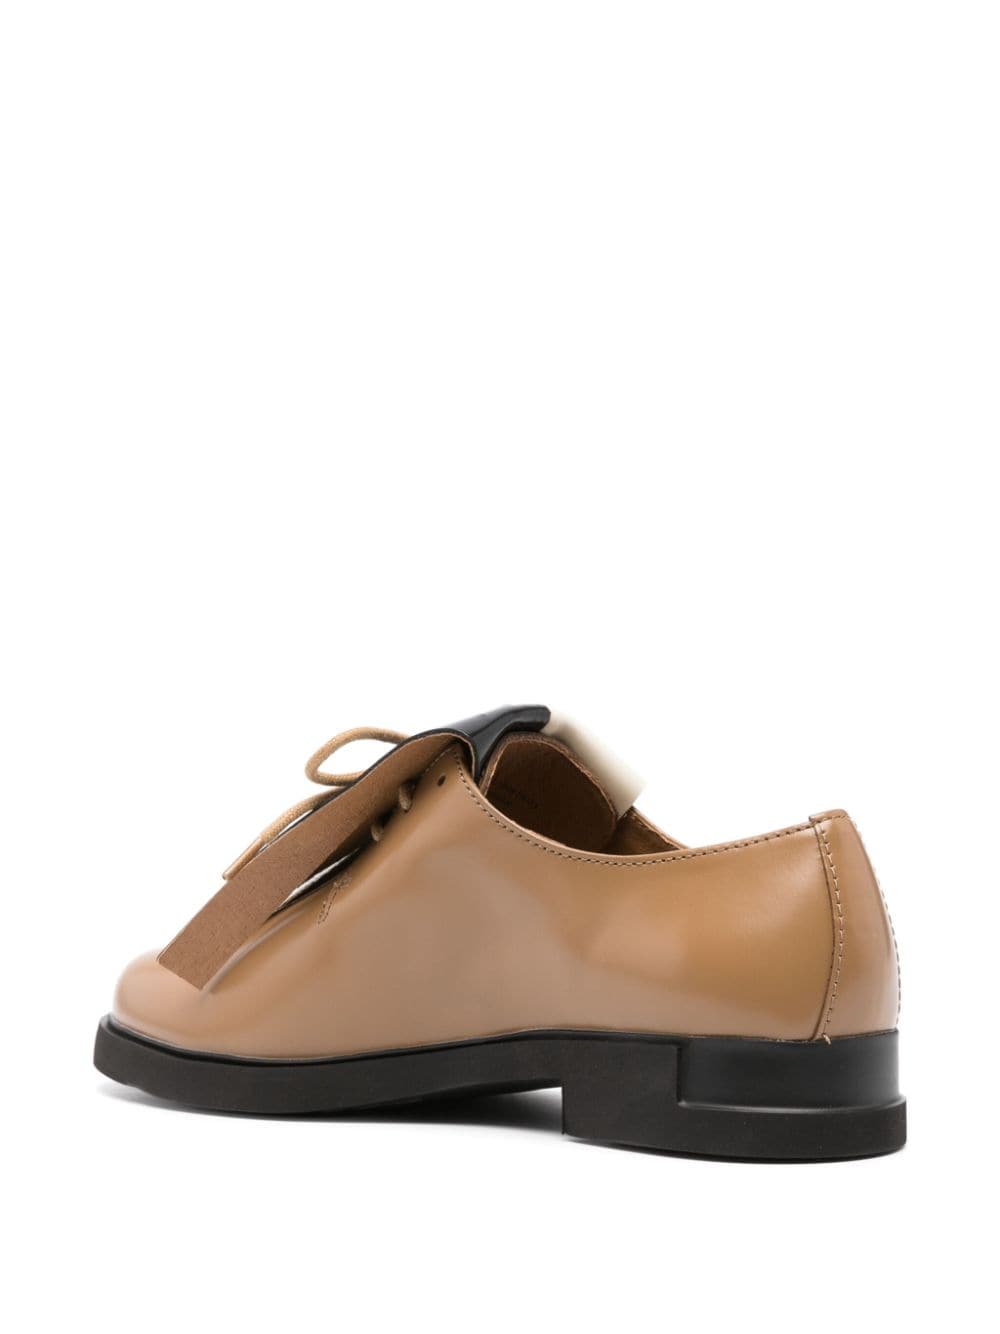 Shop Camper Iman Twins Fringed Oxford Shoes In Brown